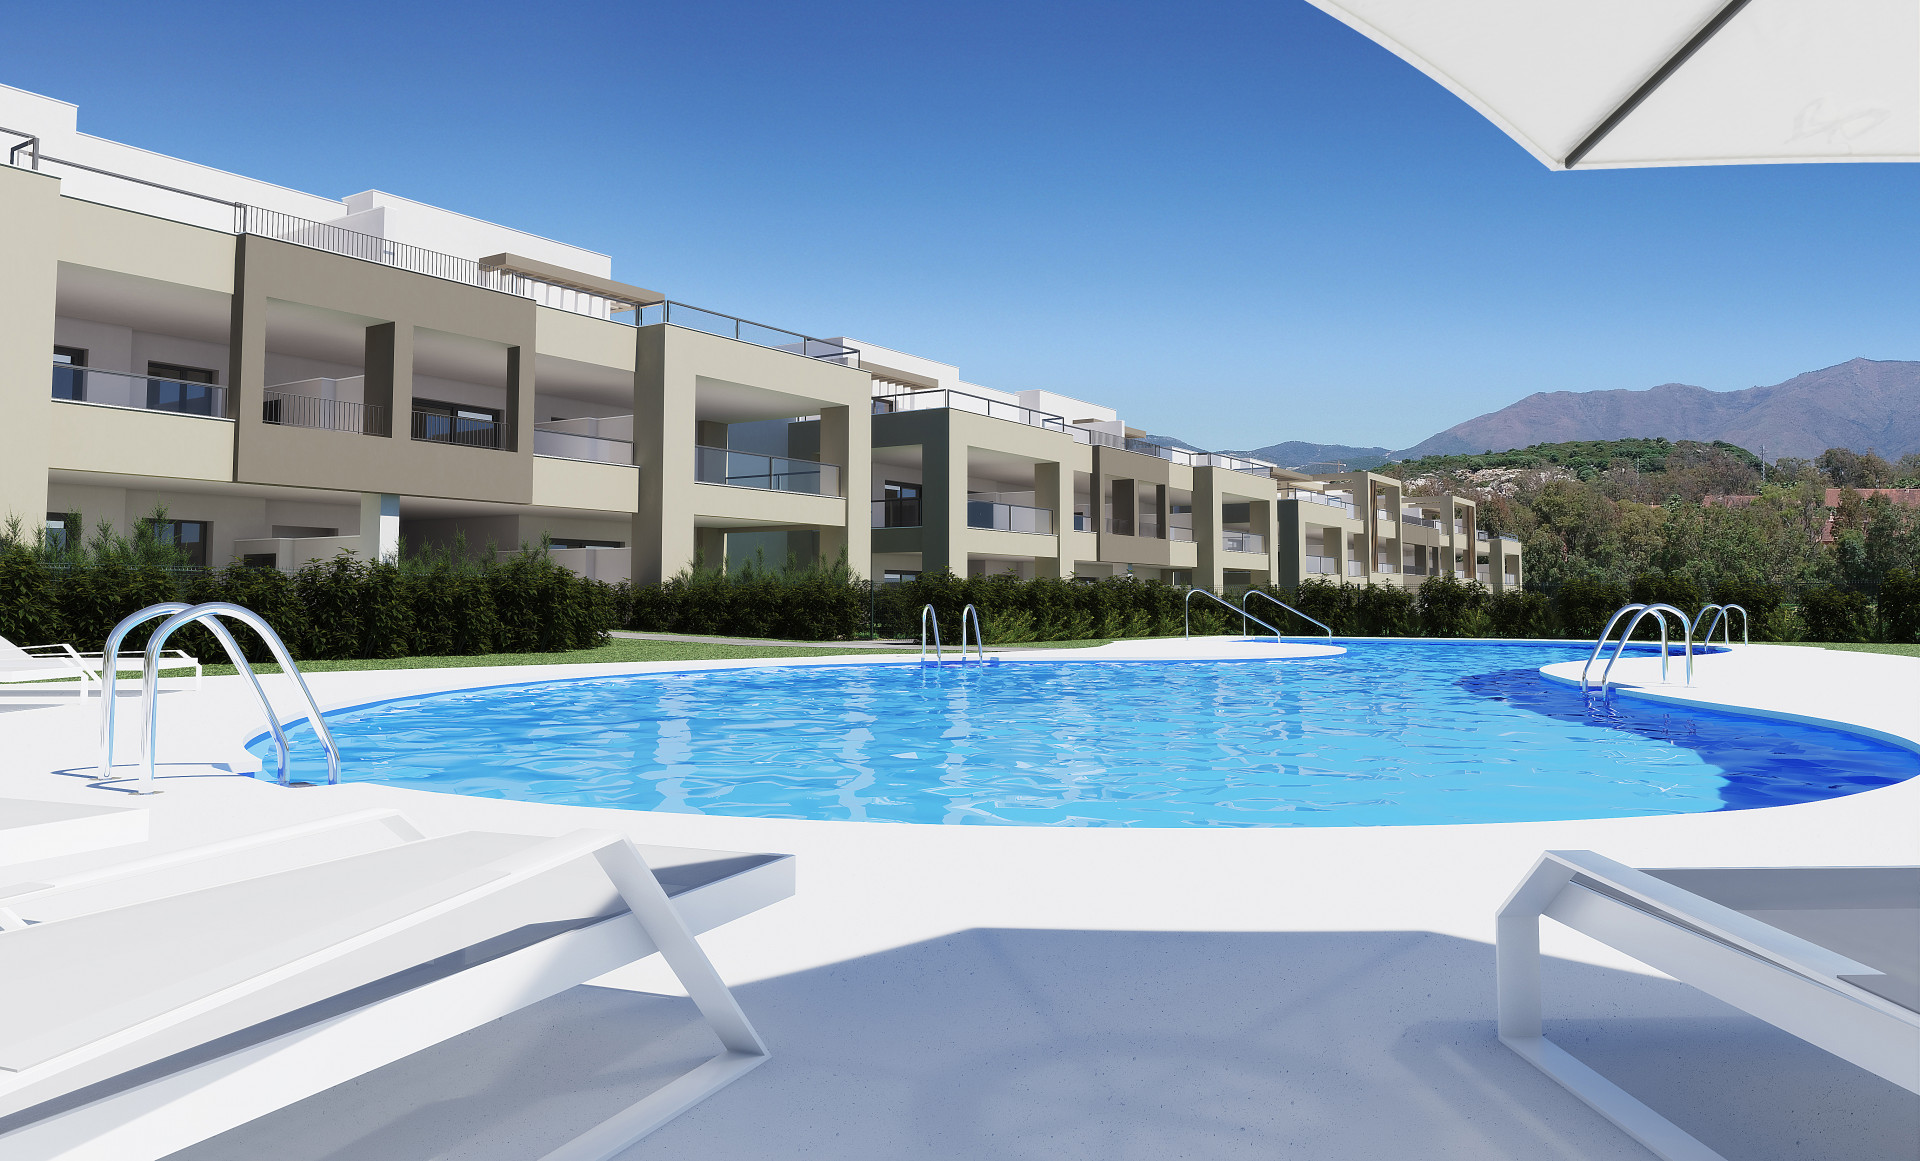 Solemar: Apartments with amazing seaviews in Casares Beach. | Image 1